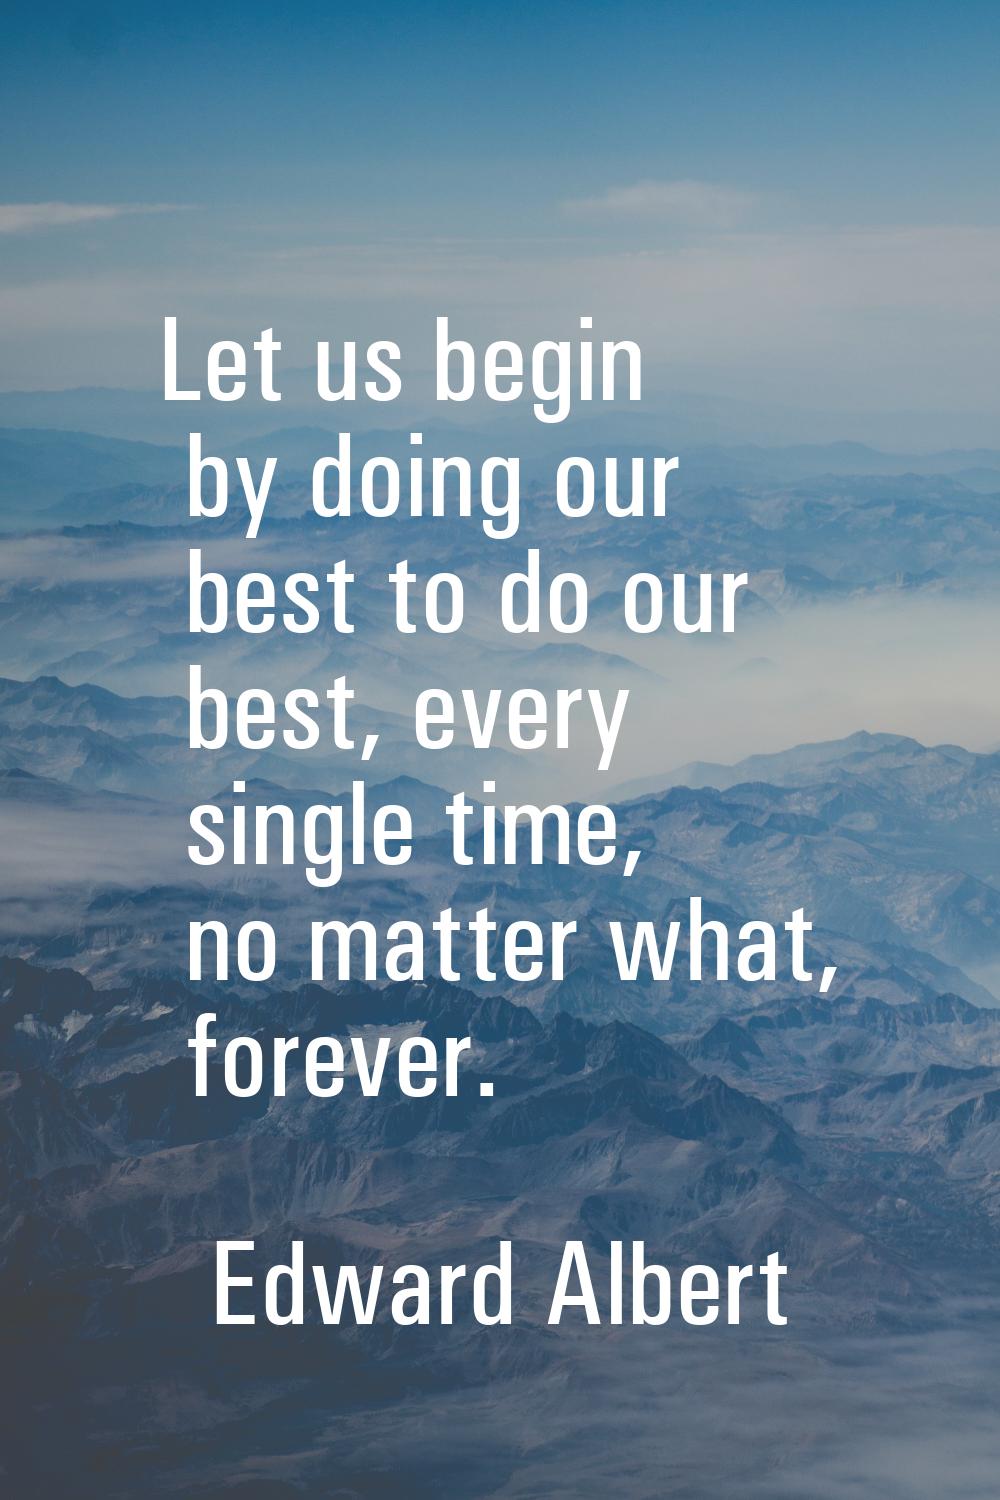 Let us begin by doing our best to do our best, every single time, no matter what, forever.